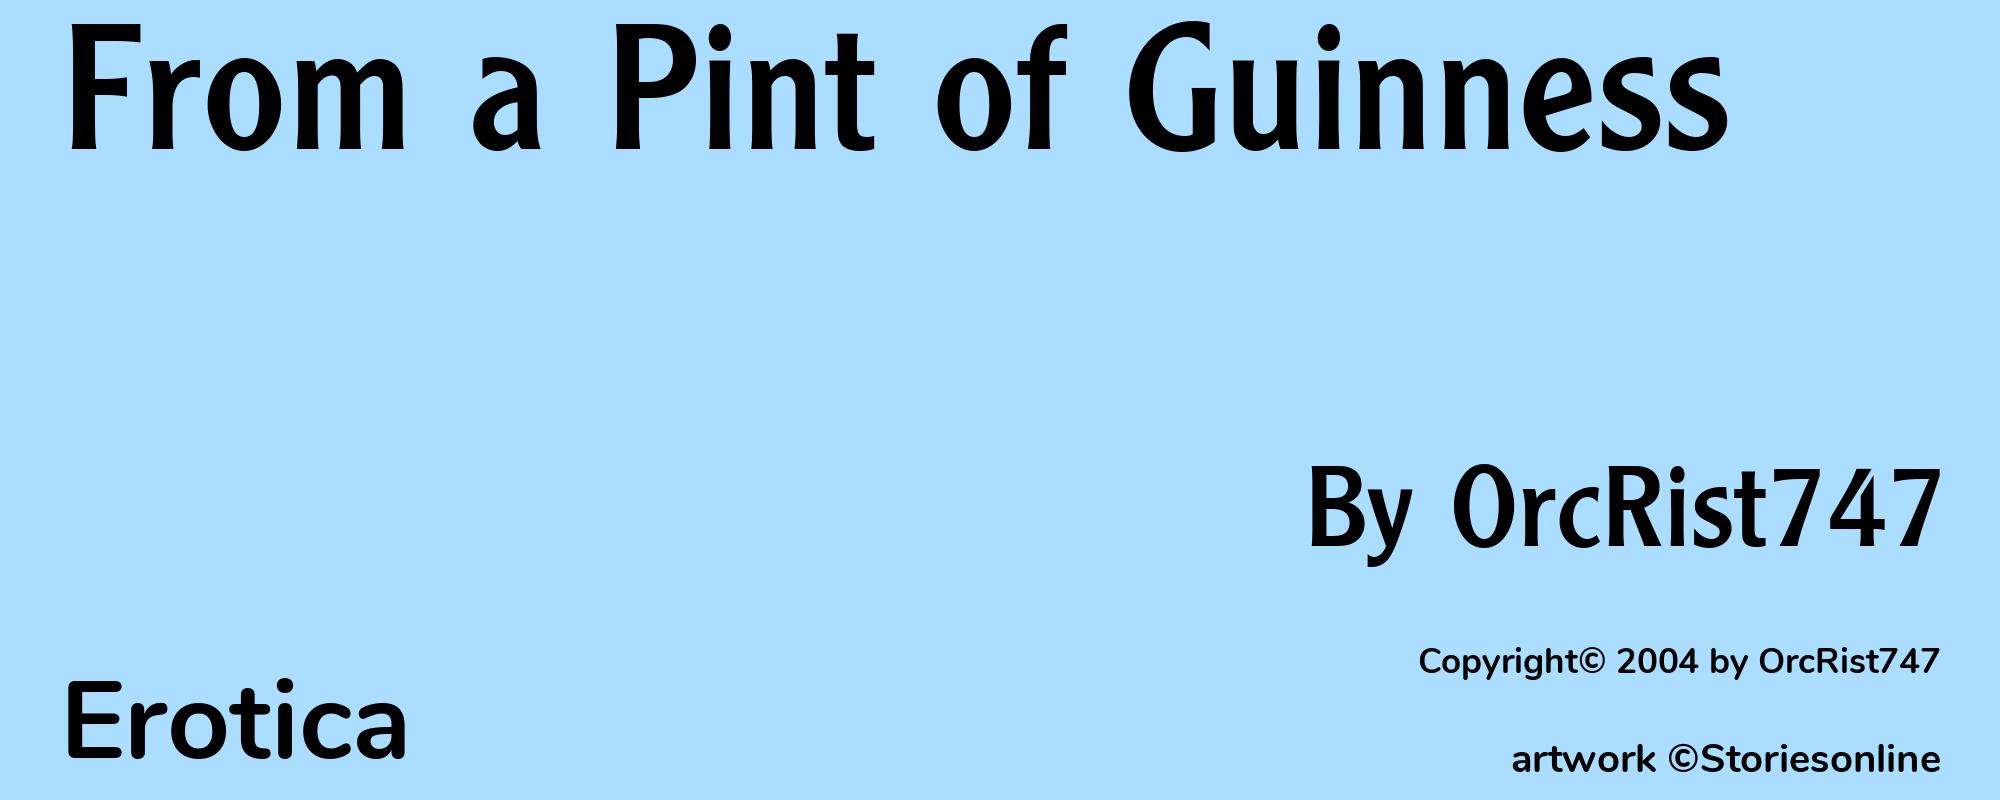 From a Pint of Guinness - Cover